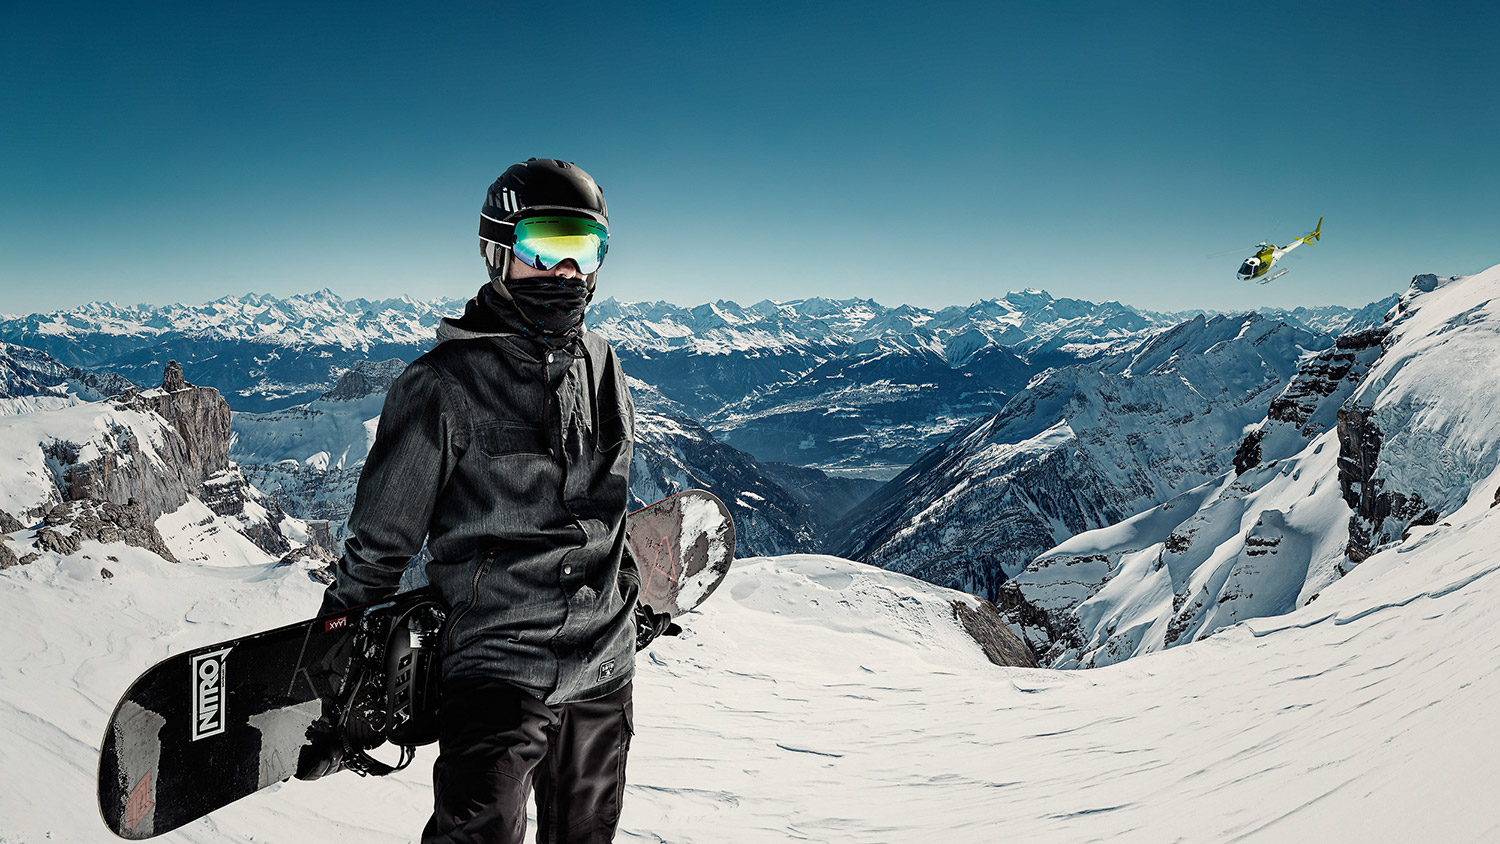 Snowboarding sports on location photo shoot compositing retouching mountain...